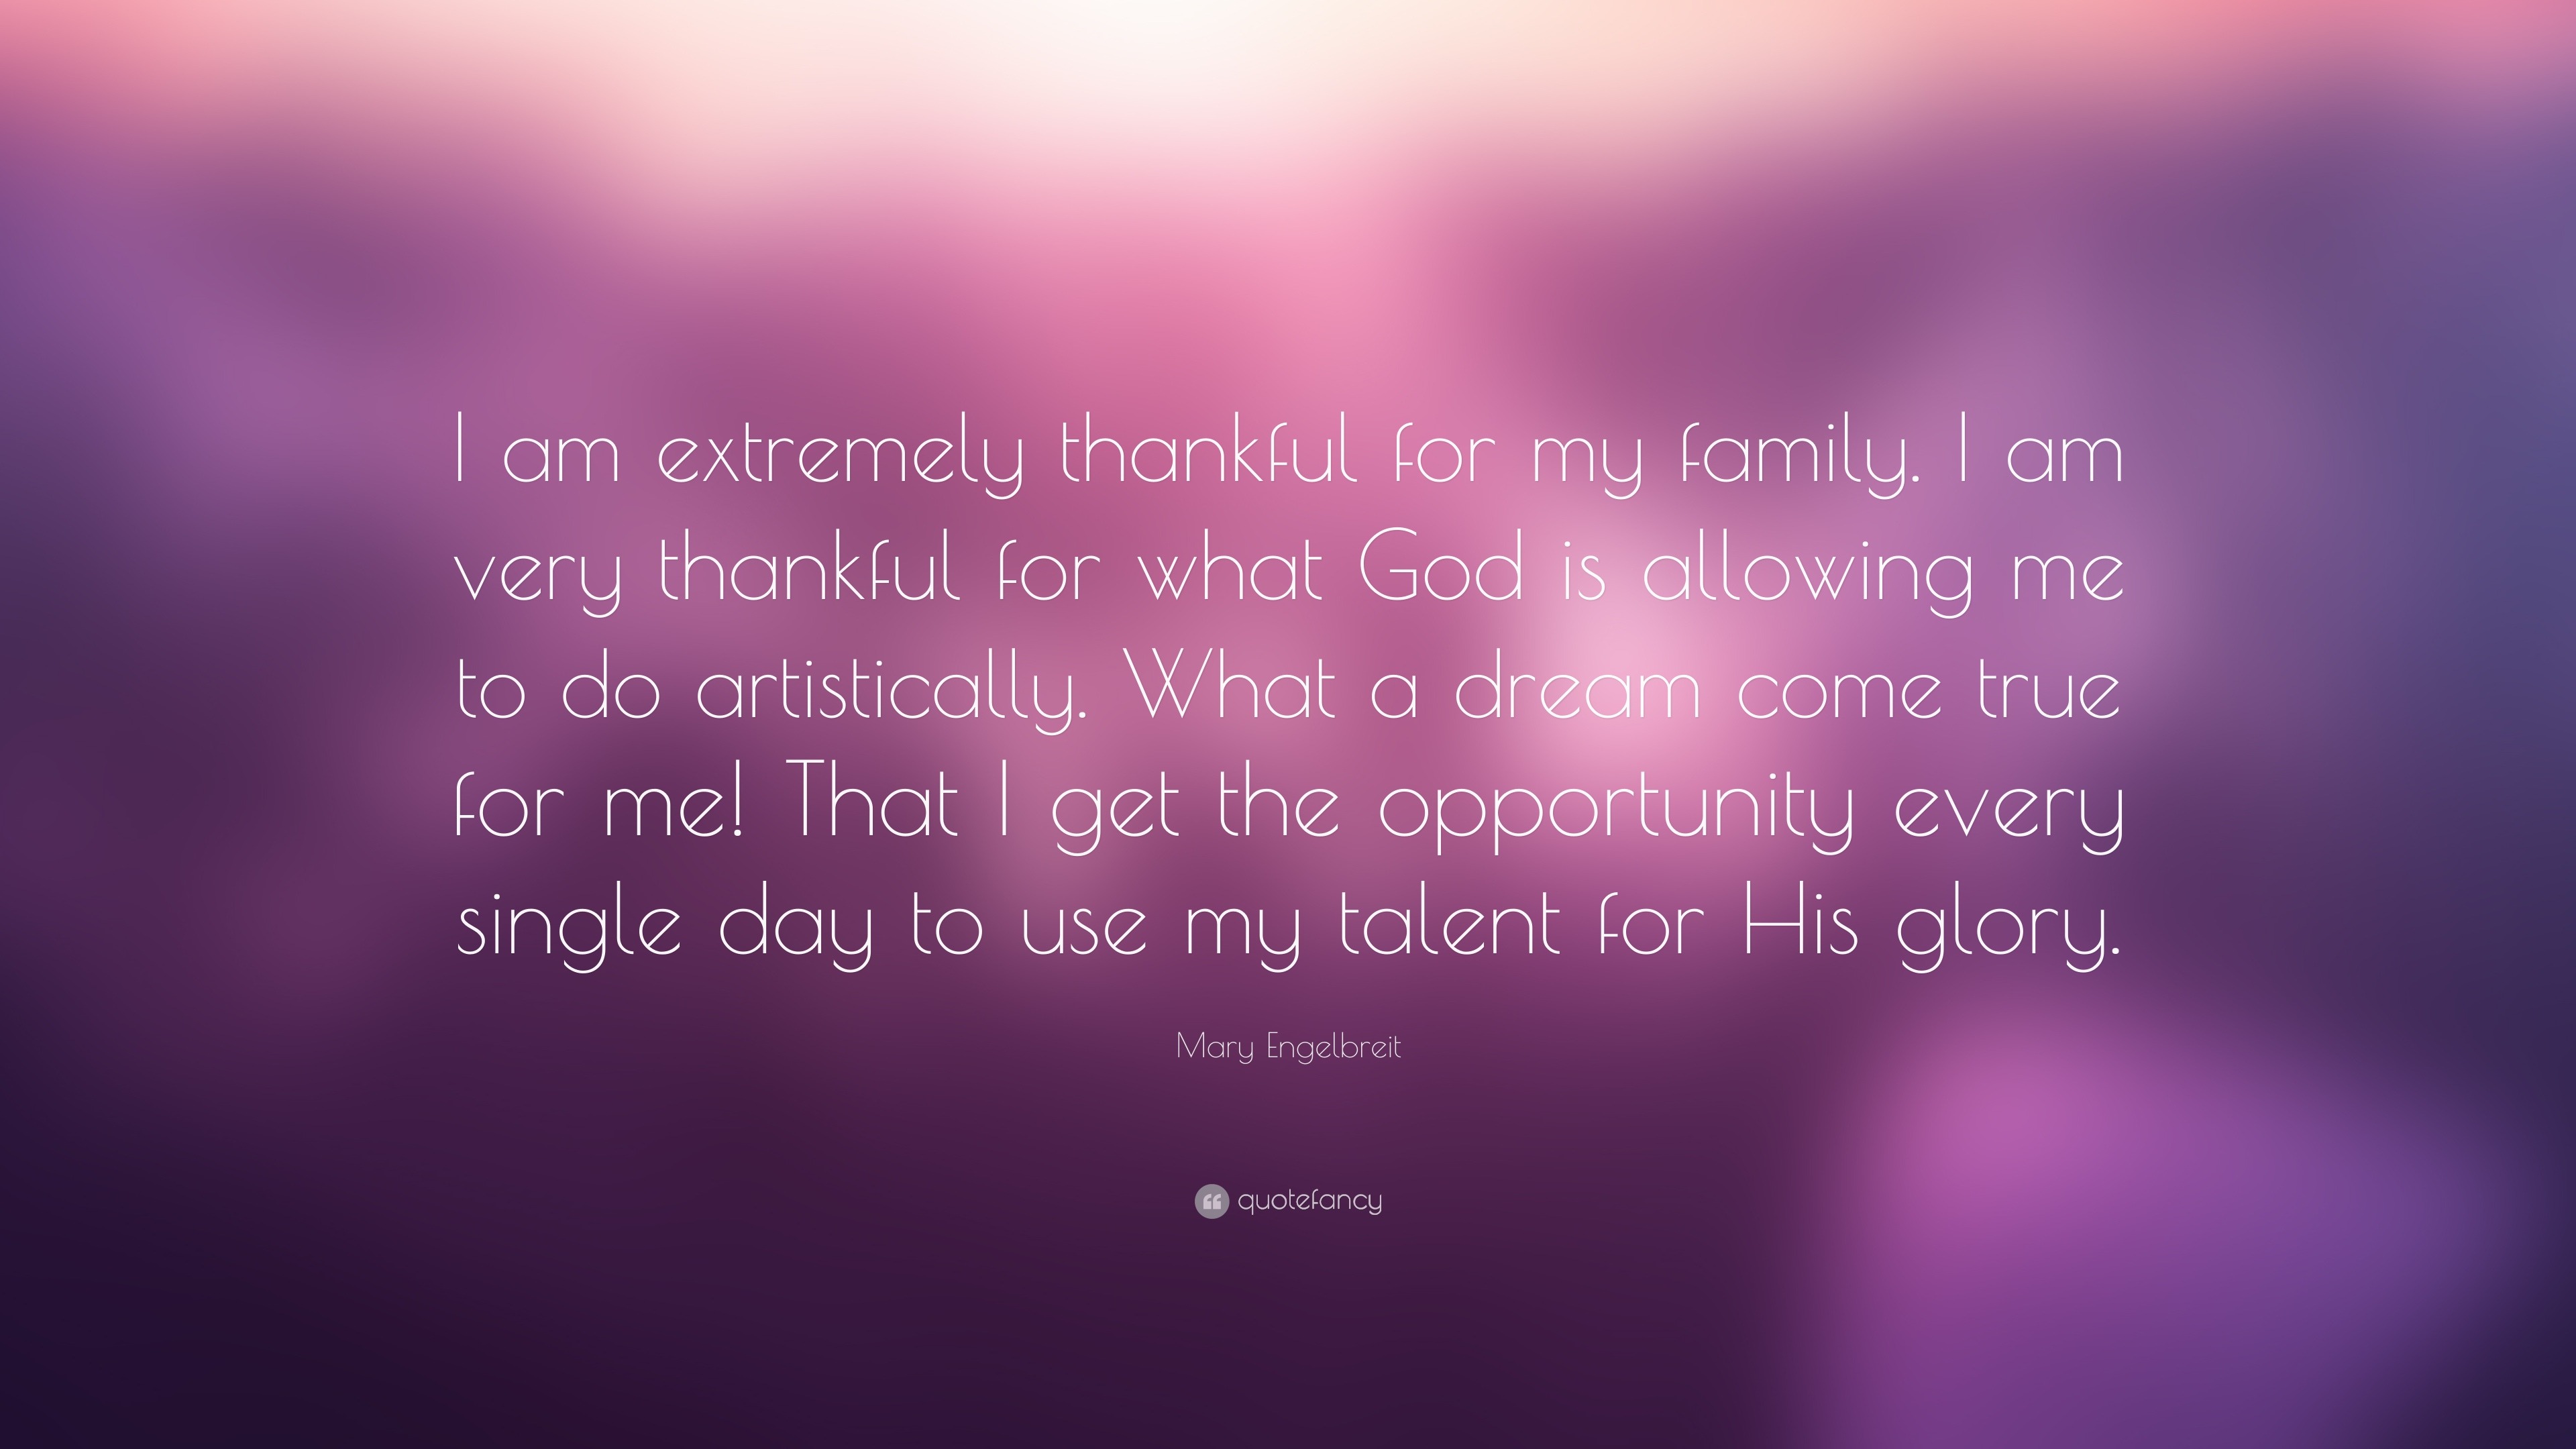 Mary Engelbreit Quote: “I am extremely thankful for my family. I am very  thankful for what God is allowing me to do artistically. What a dream c”